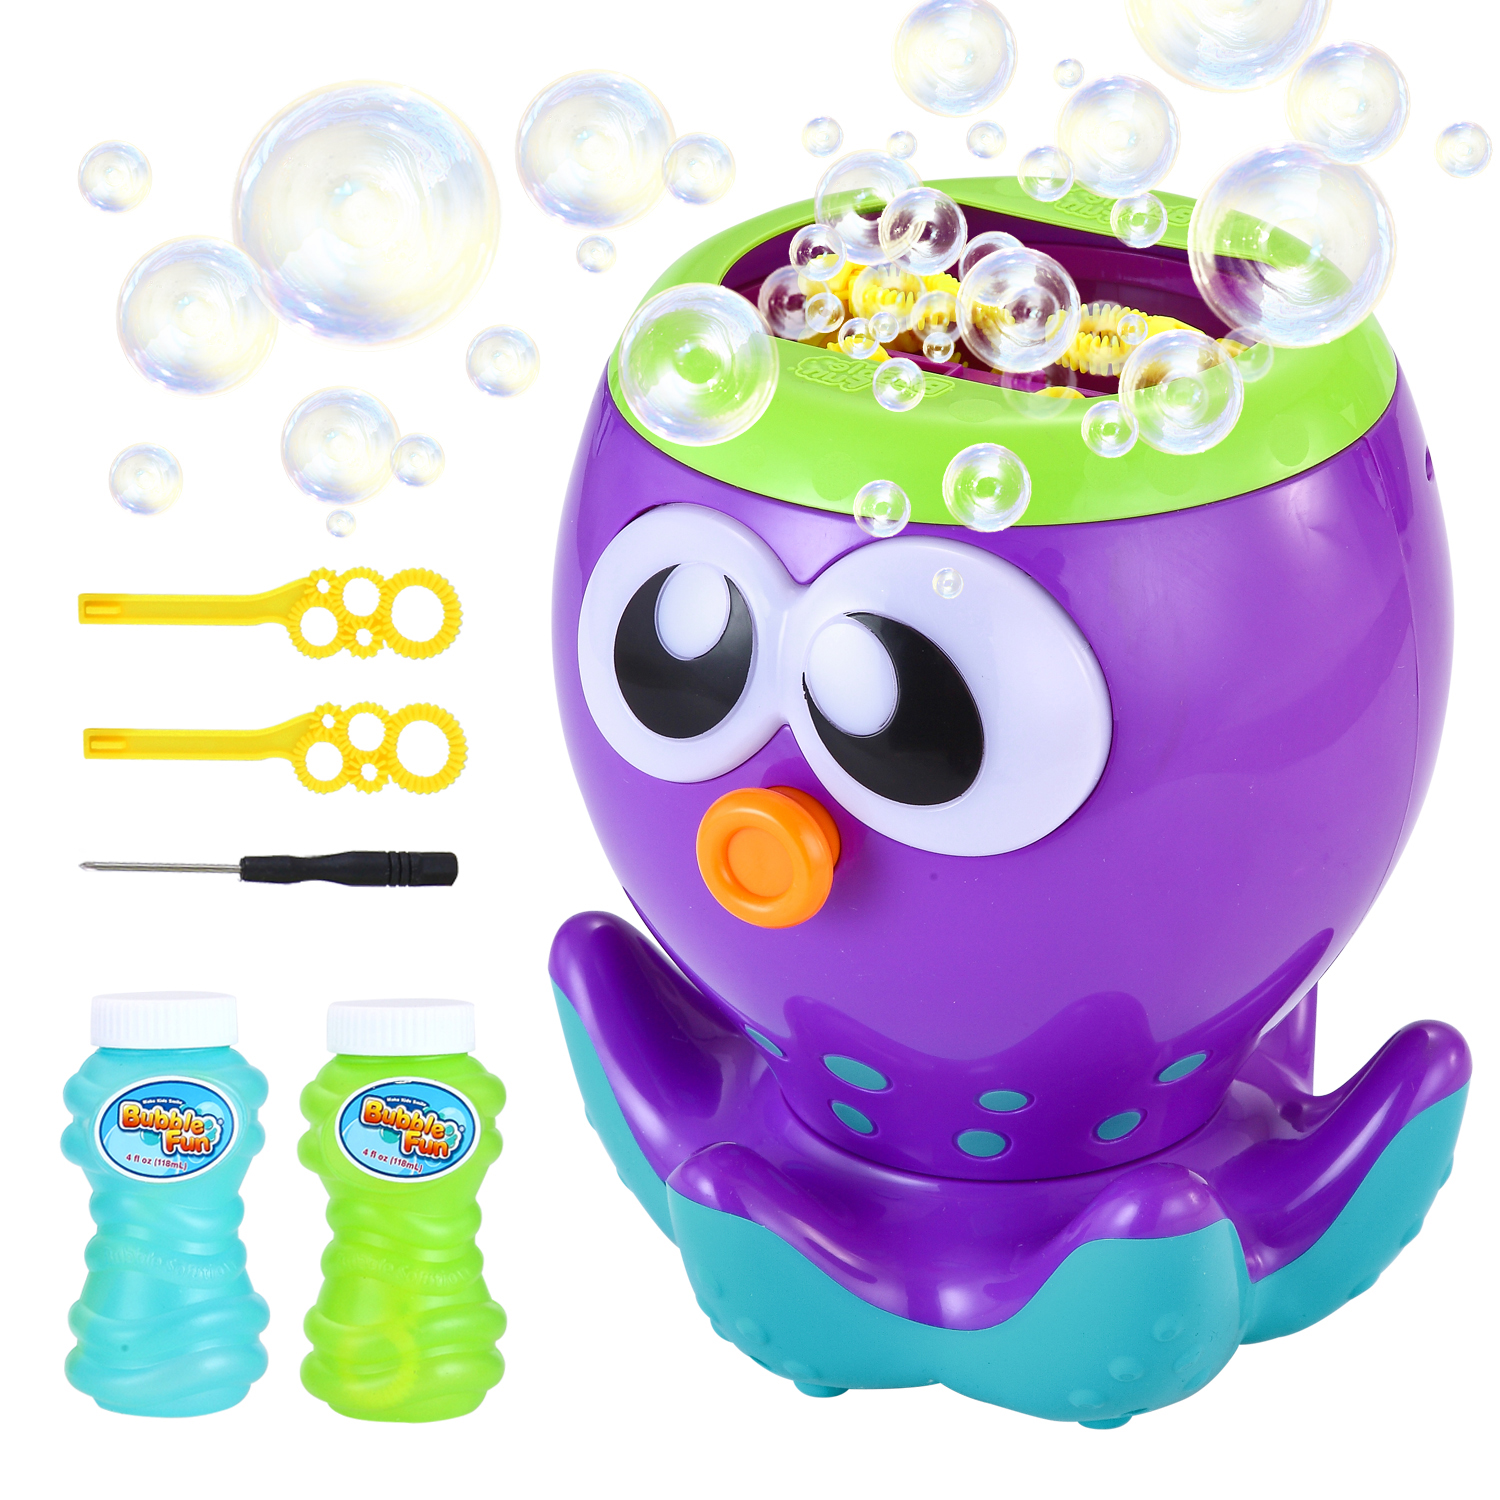 Kids Childrens Octopus Bubble Machine Blower Solution Birthday Party Bubbles Toy 